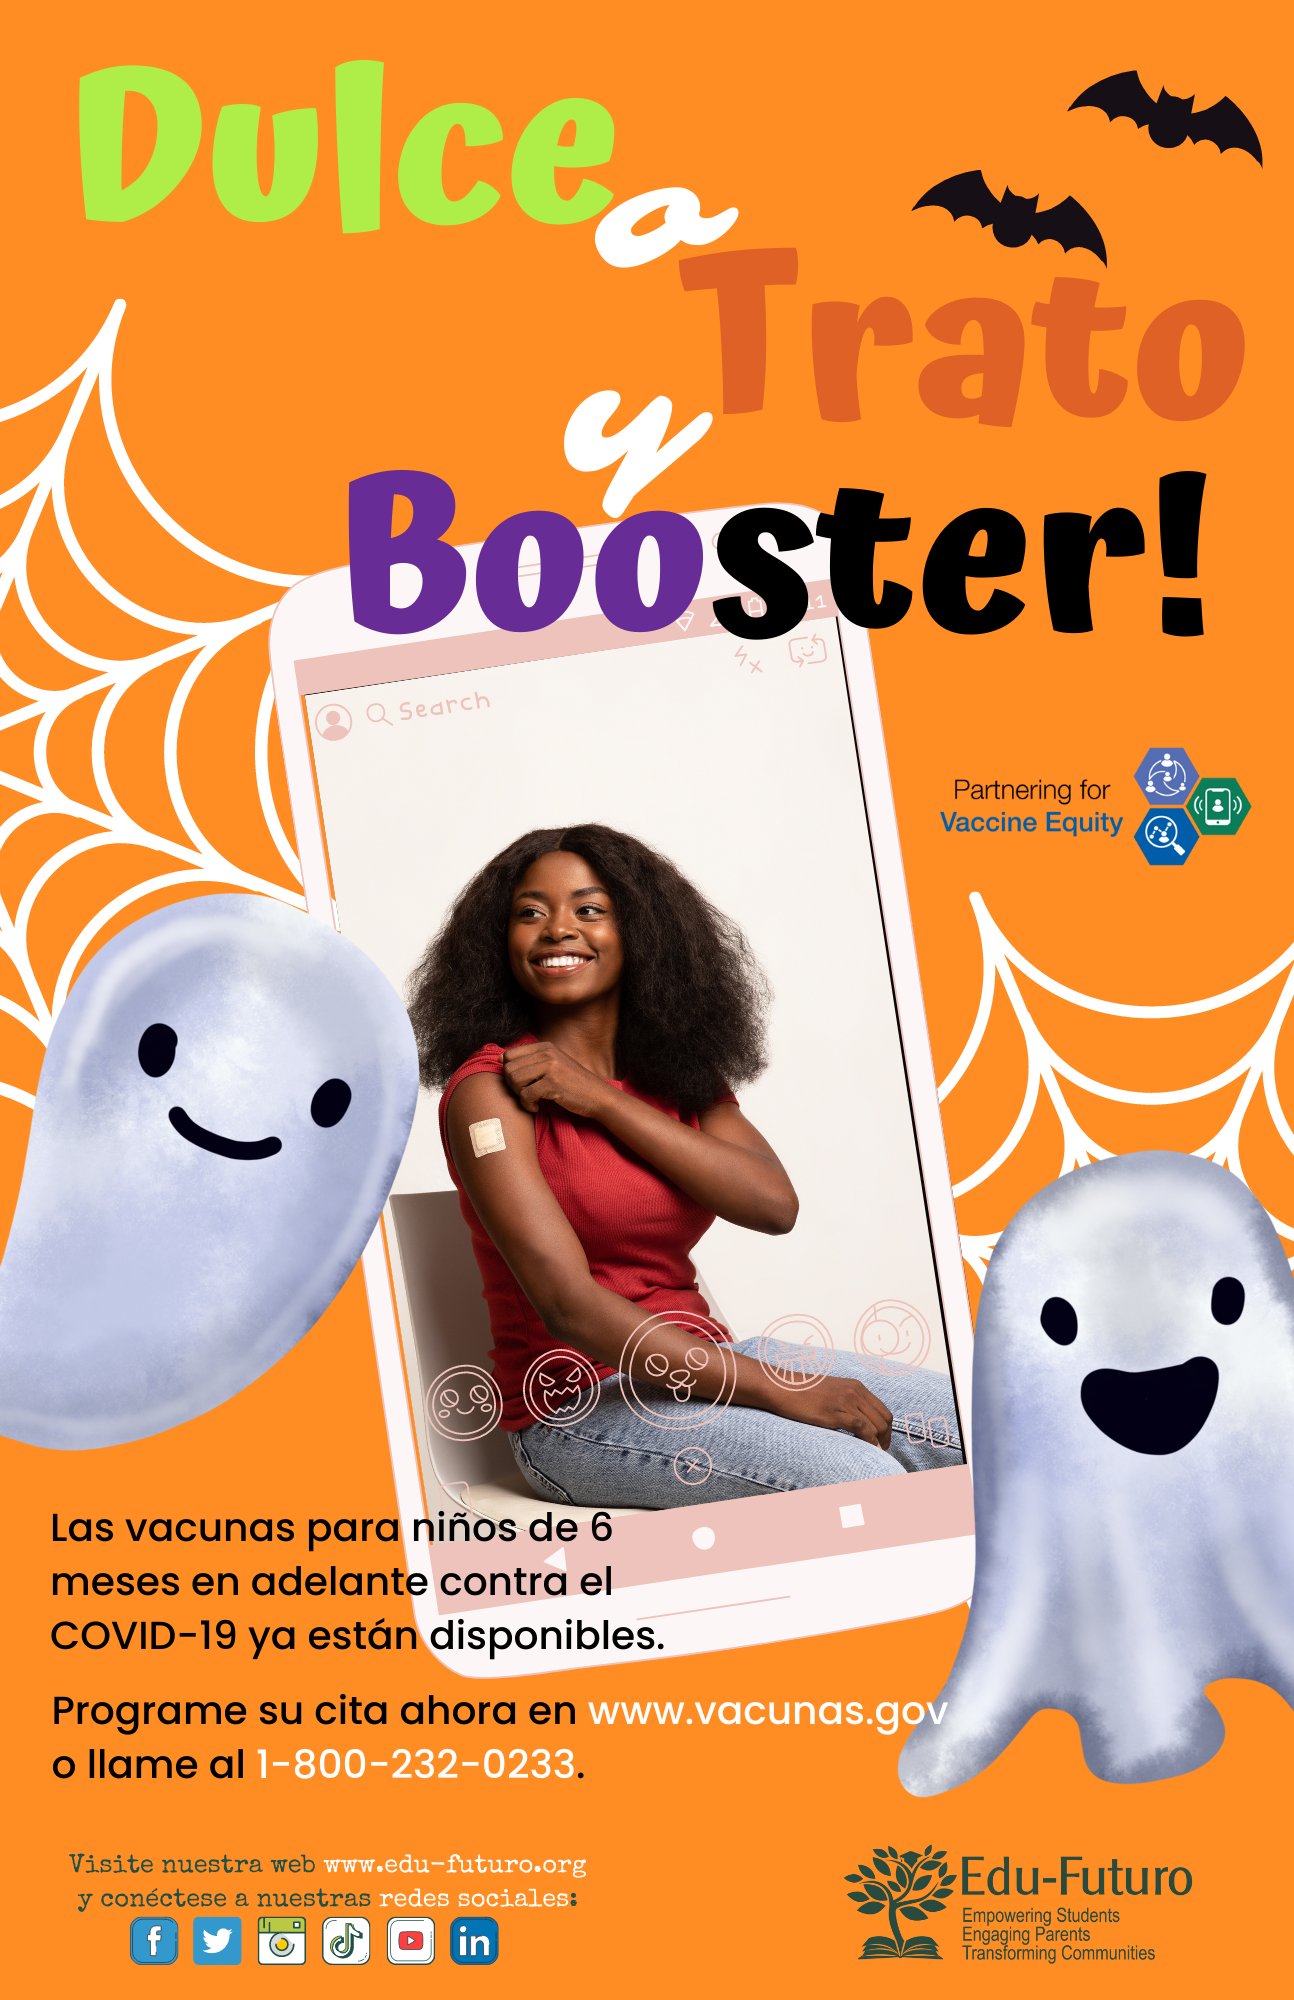 A Black woman shows an adhesive bandage on her arm where she got vaccinated, with cartoon images of ghosts, bats, and spider webs. Spanish text reads, "Trick or Treat and Booster It!"